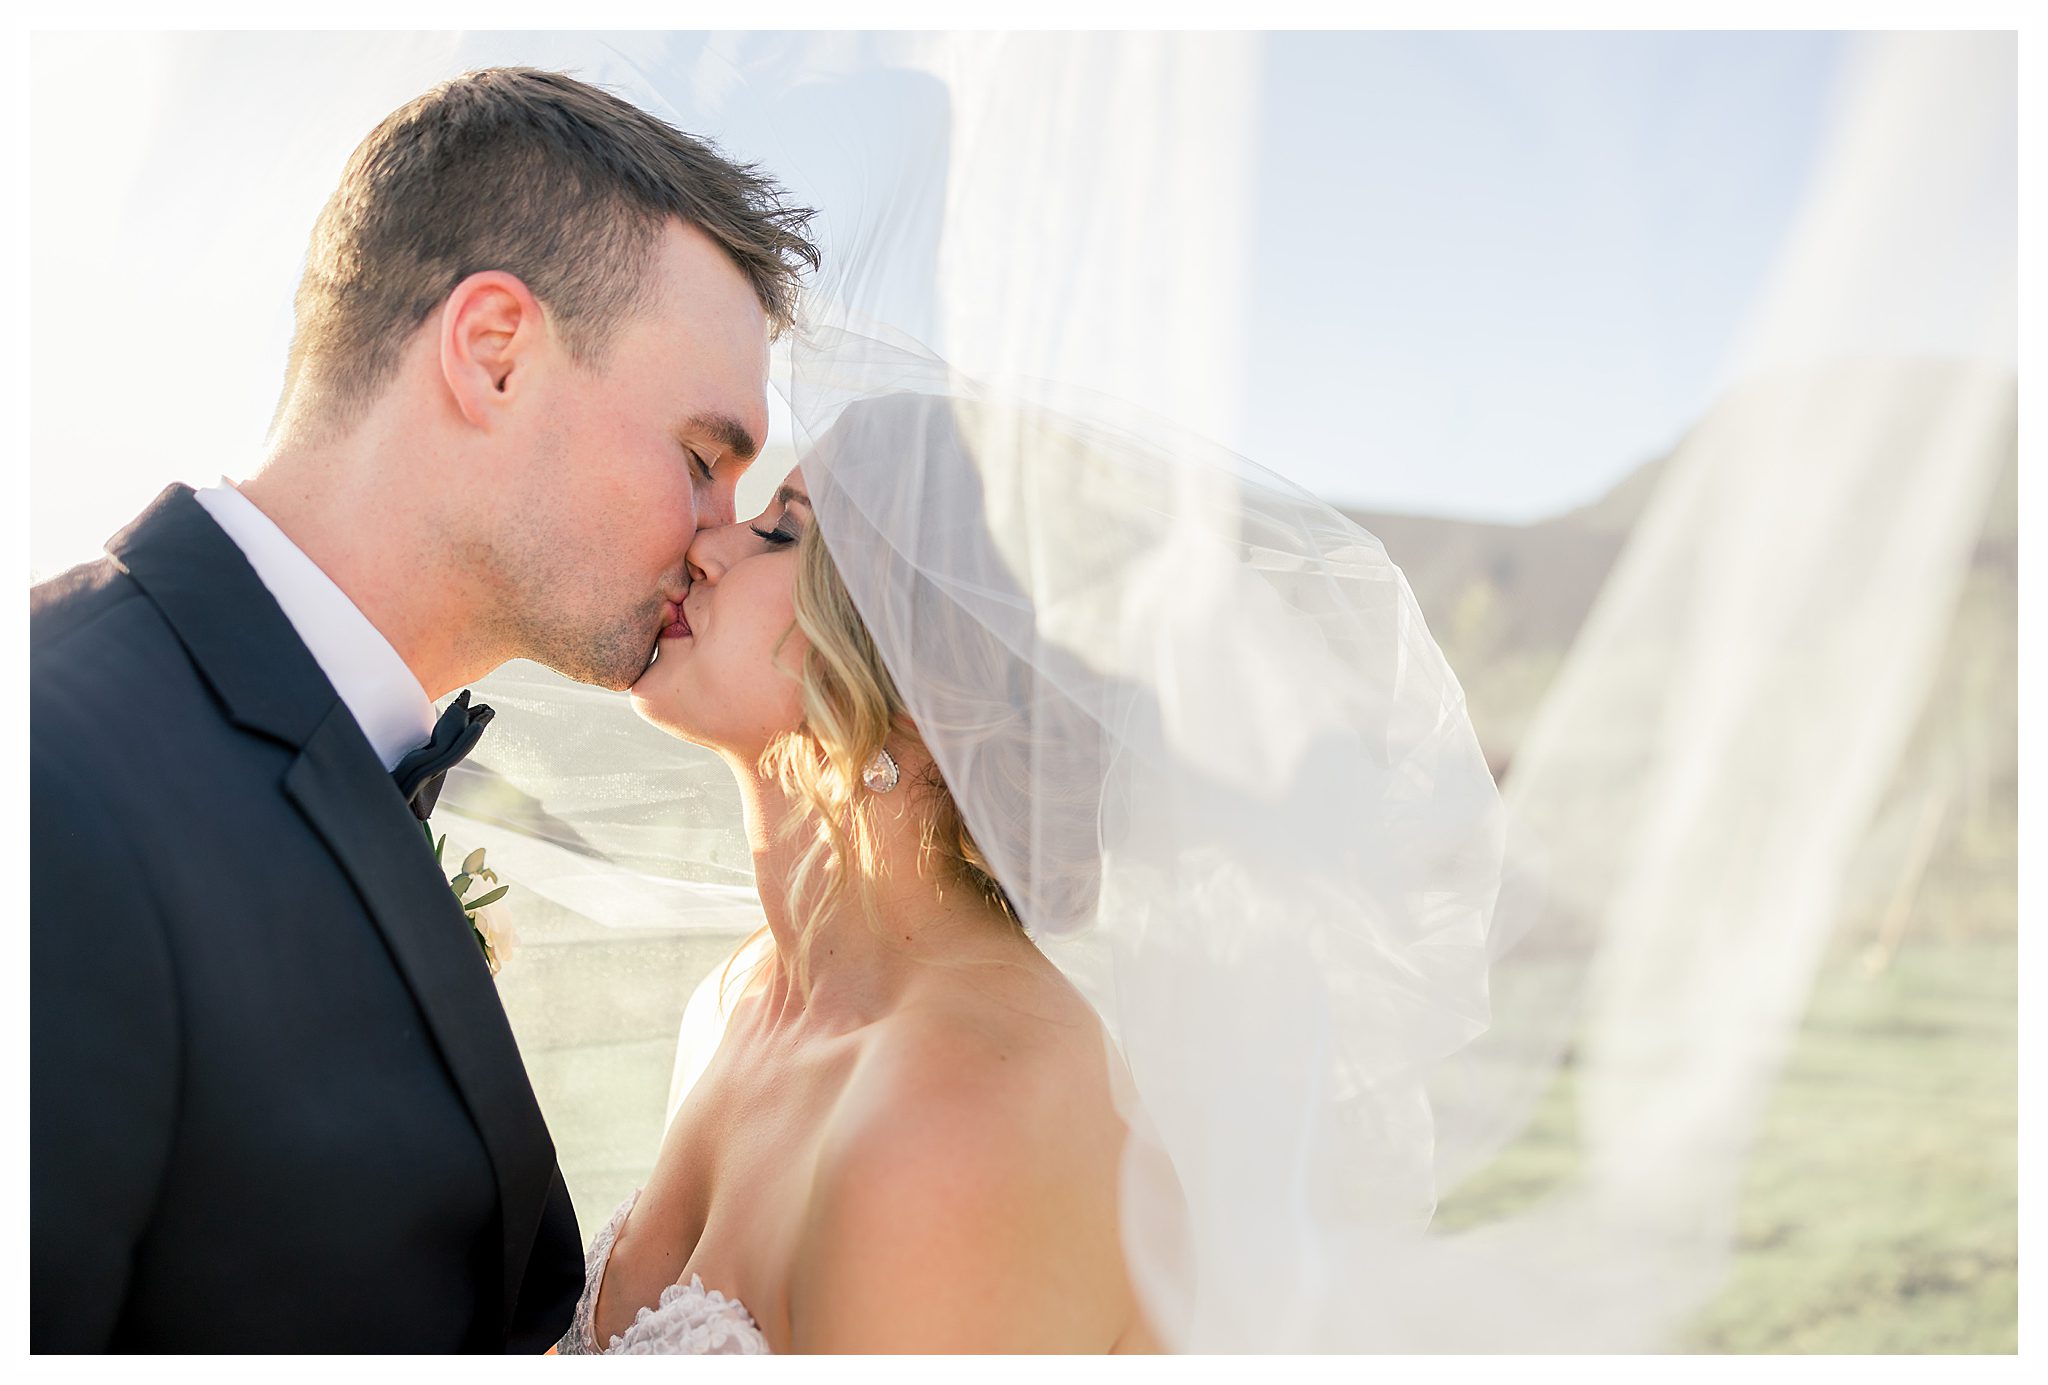 The best pictures from Yonah Mountain Vineyards Wedding Photographer photography